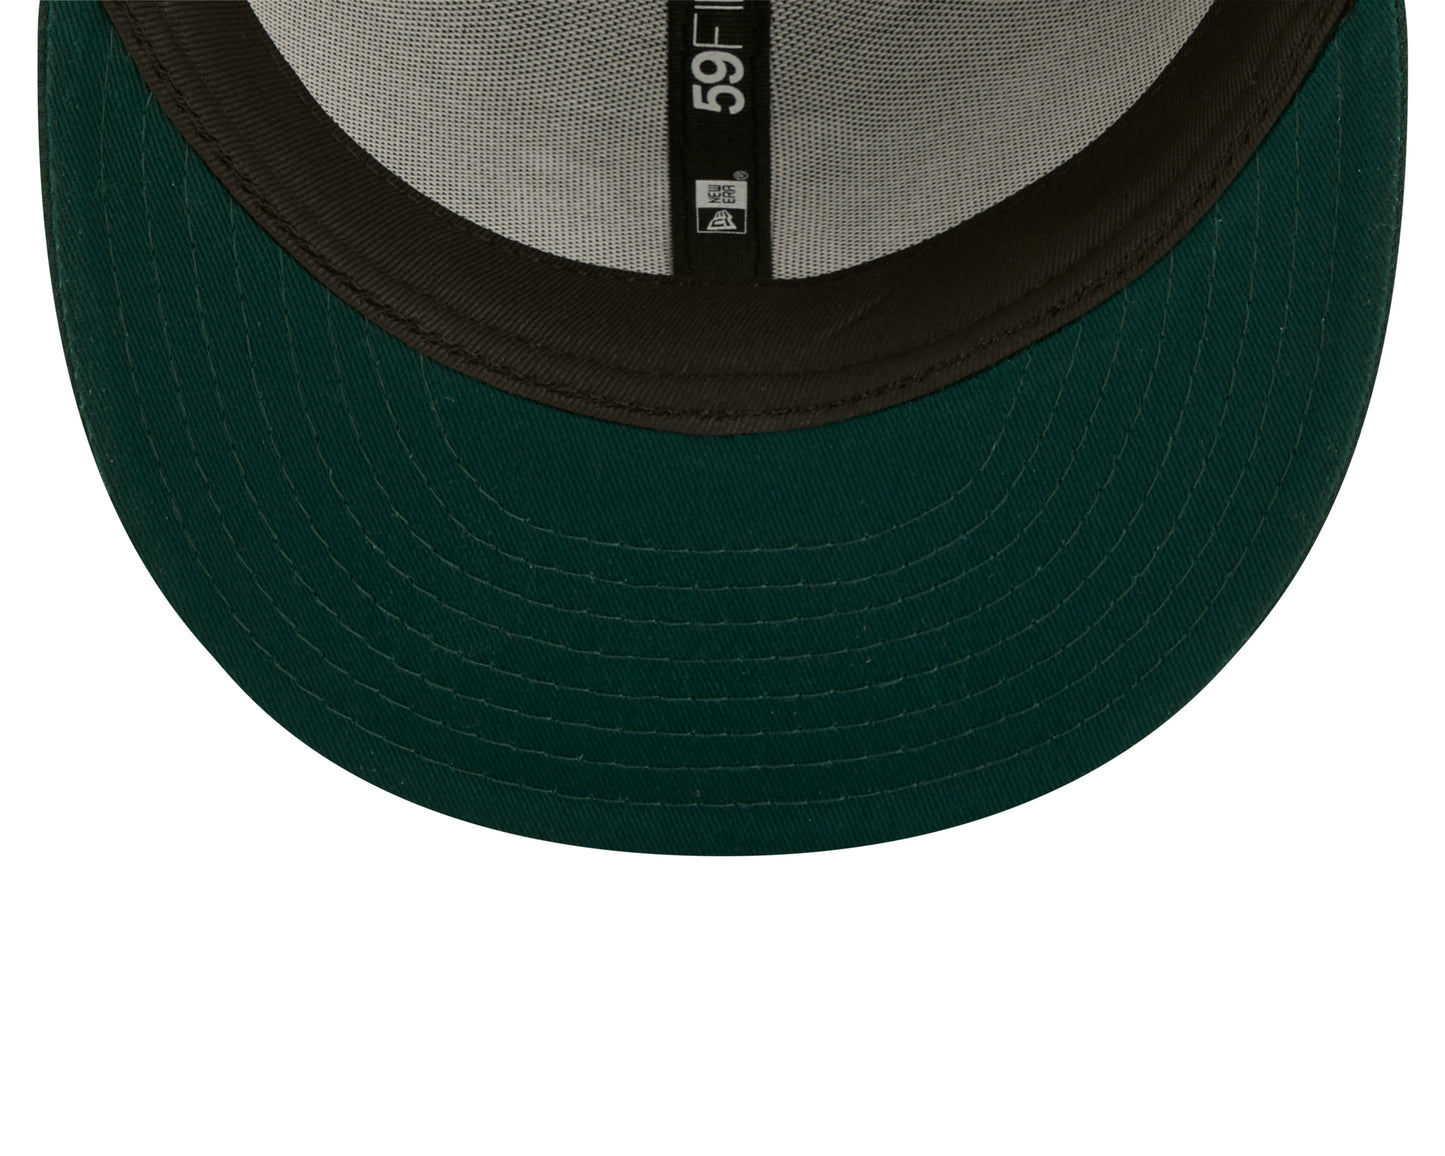 Oakland Athletics New Era City Side Patch 59FIFTY Fitted Hat - Green